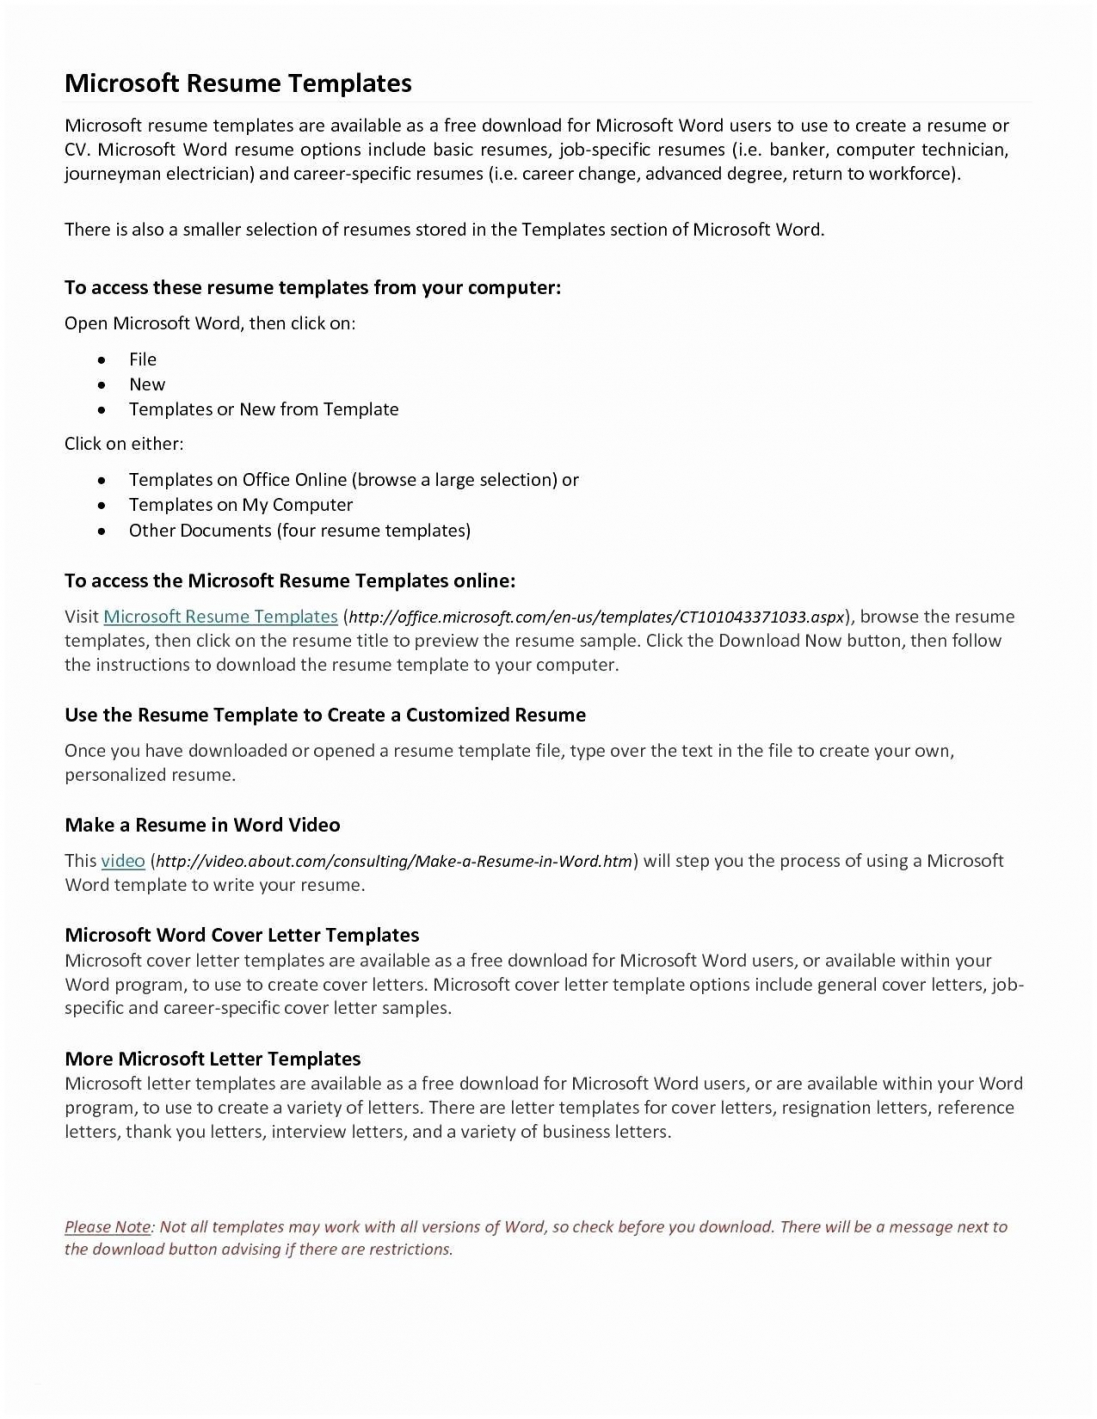 Resume Templates Microsoft Word Formal Letter Microsoft Word 2007 Valid Microsoft Word 2007 Resume resume templates microsoft word|wikiresume.com